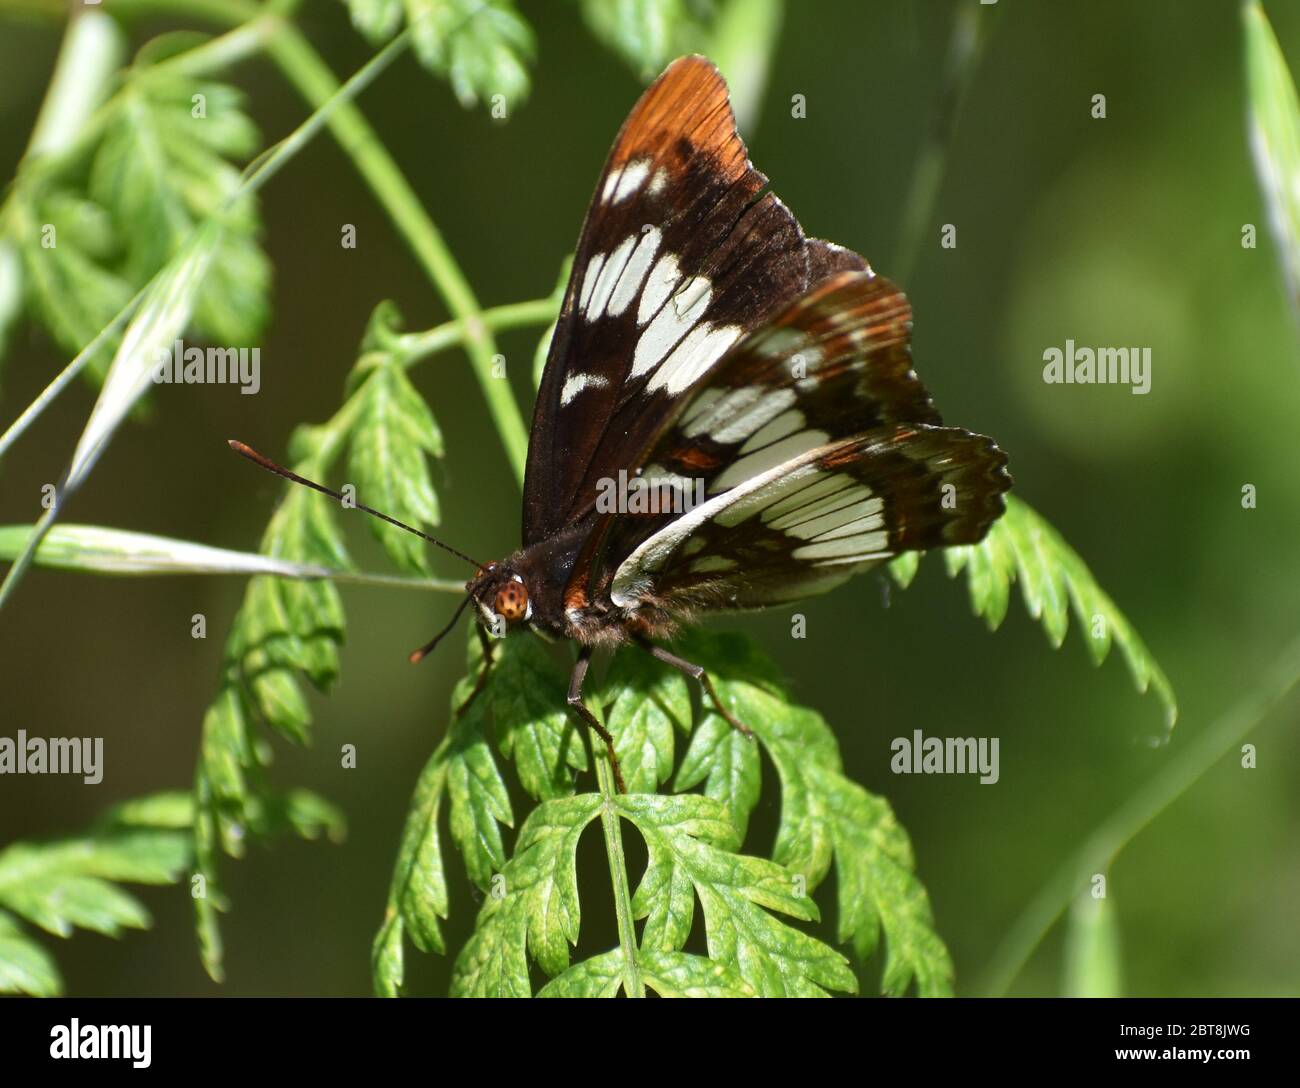 Lorquin's Admiral (Limenitis lorquini), a member of the Nymphalinae subfamily of butteflies, perched on a leaf, near Watsonville Slough. Stock Photo